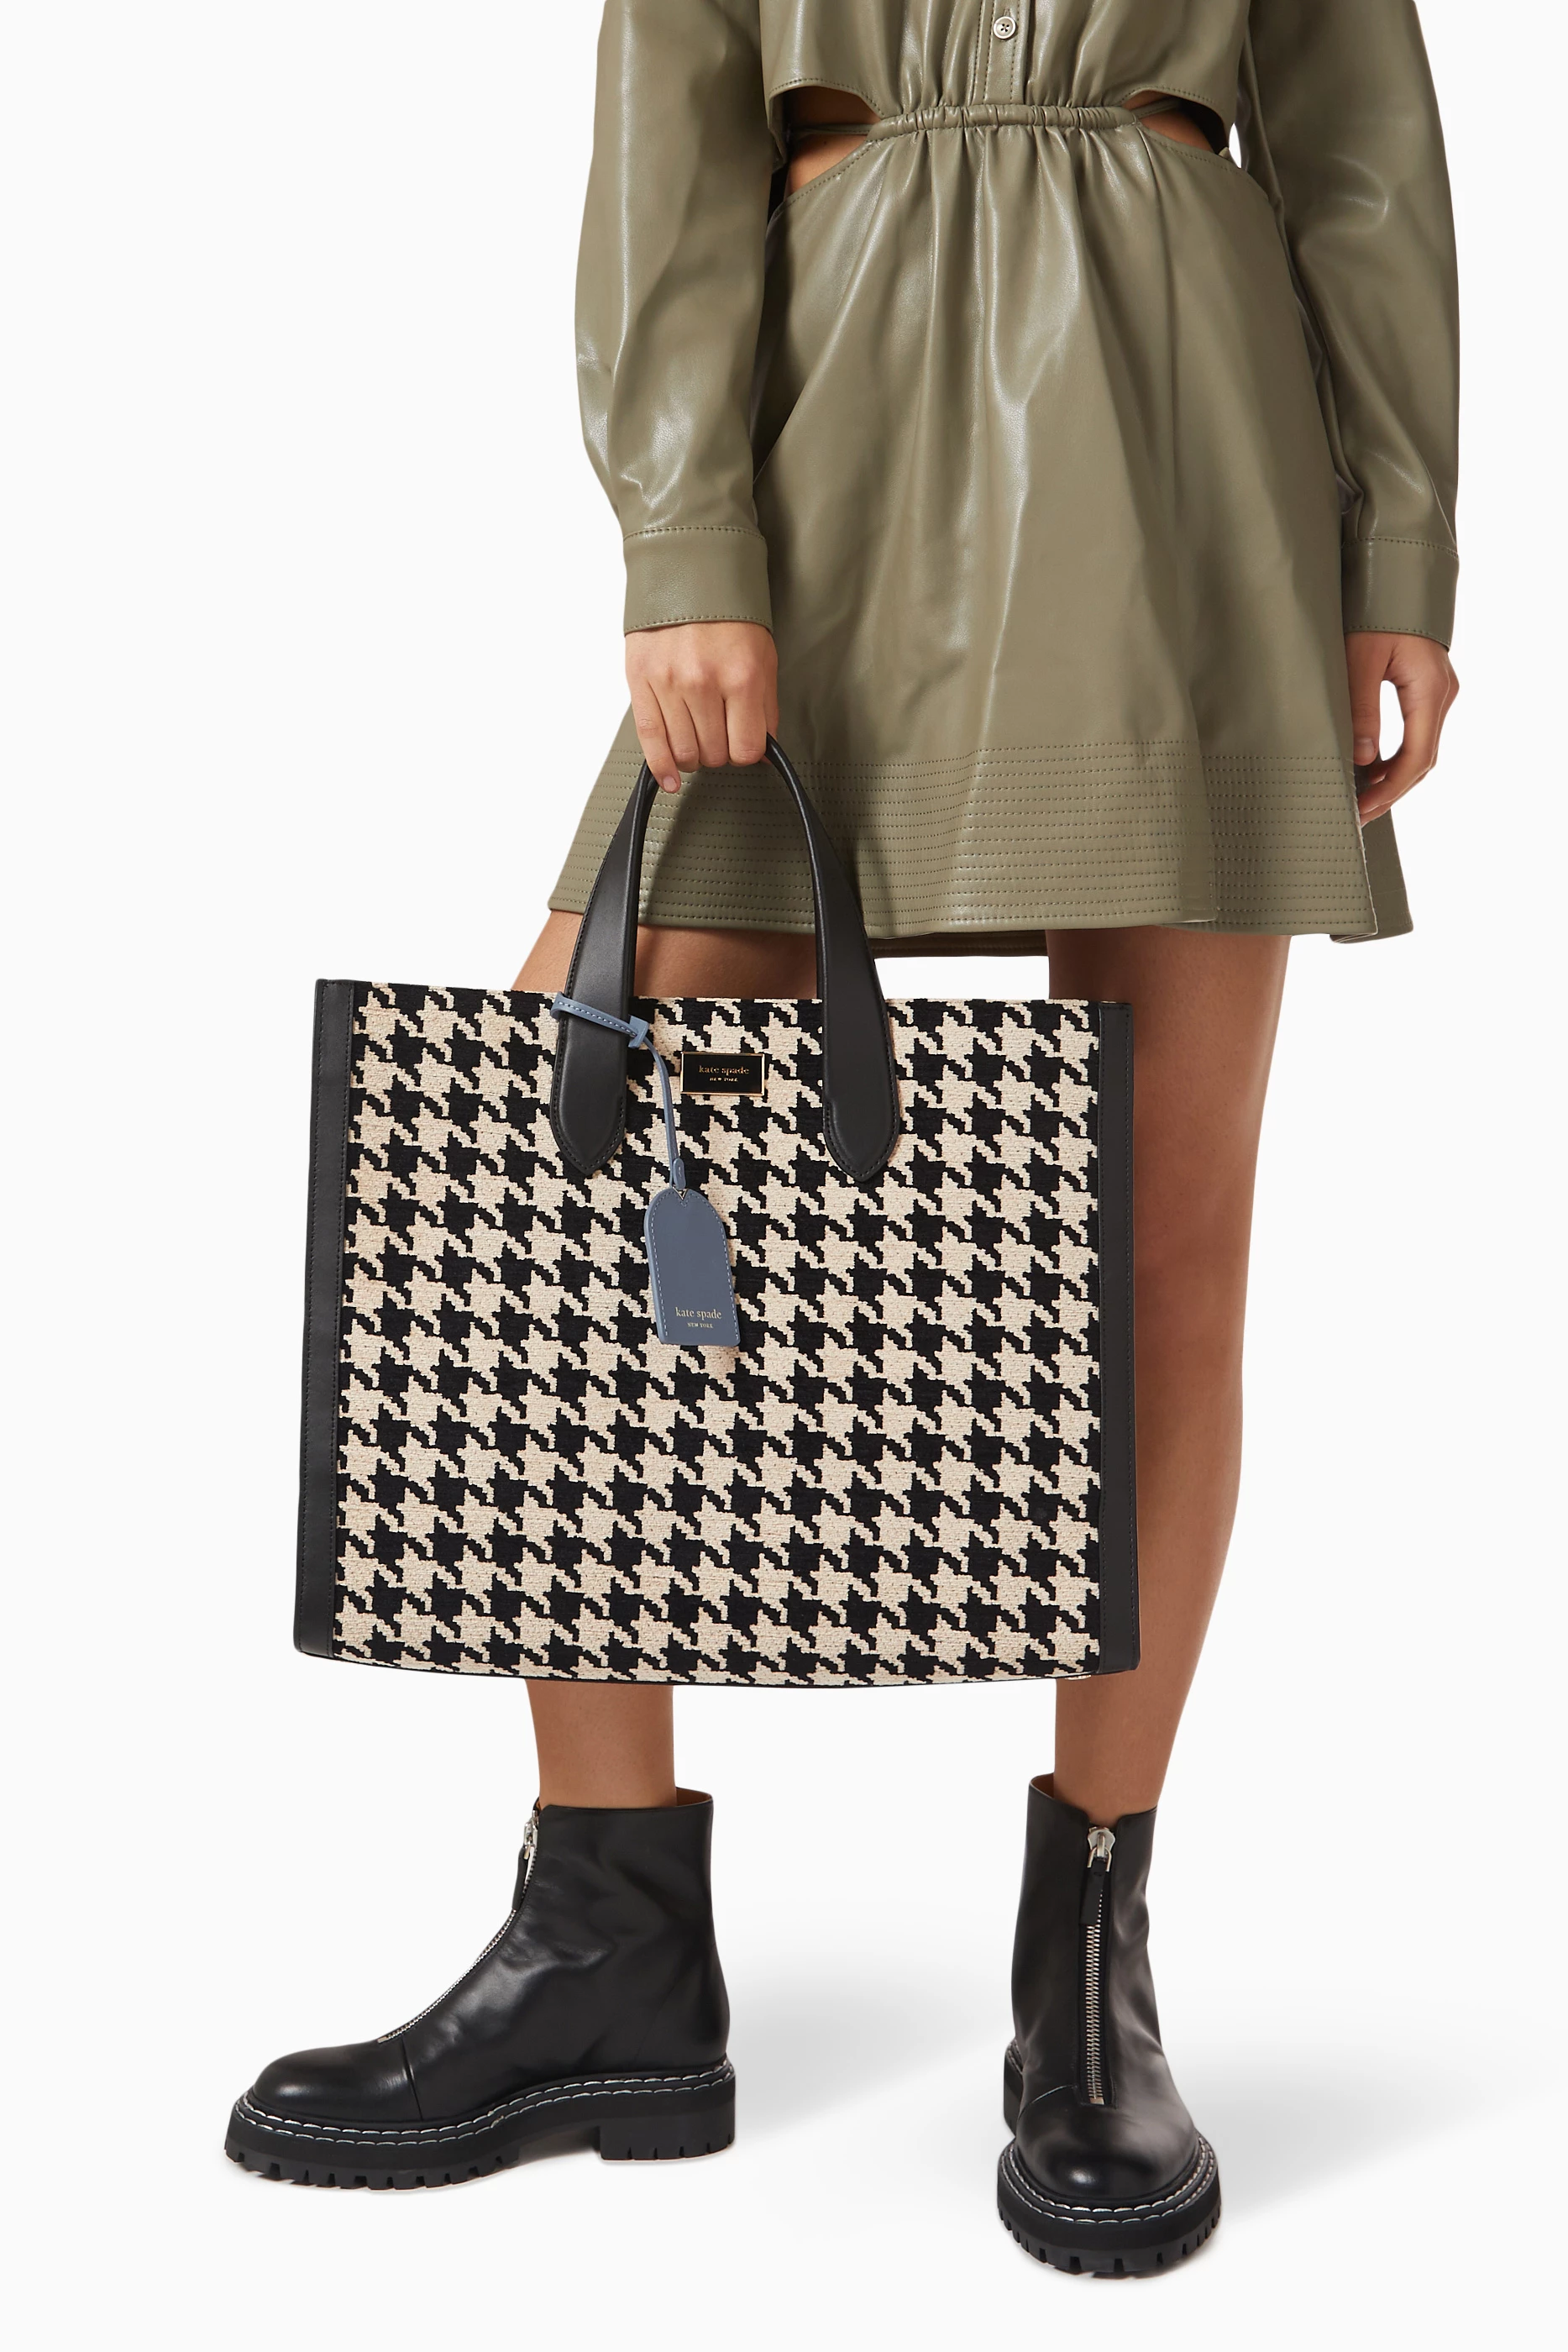 kate spade, Bags, Kate Spade New York Manhattan Houndstooth Chenille Large  Tote Influencer